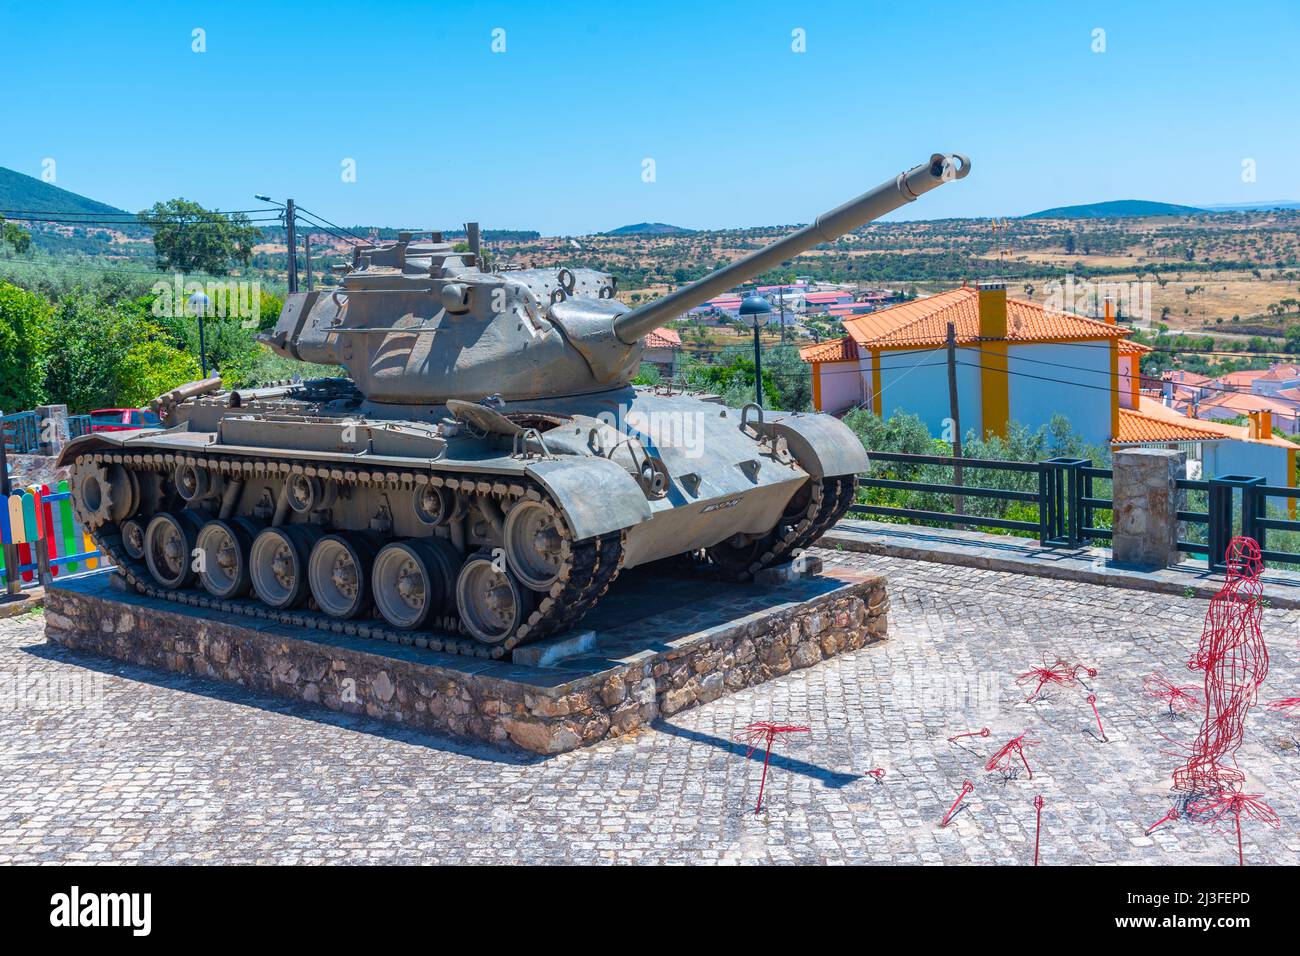 A military tank at Penha Garcia village in Portugal. Stock Photo